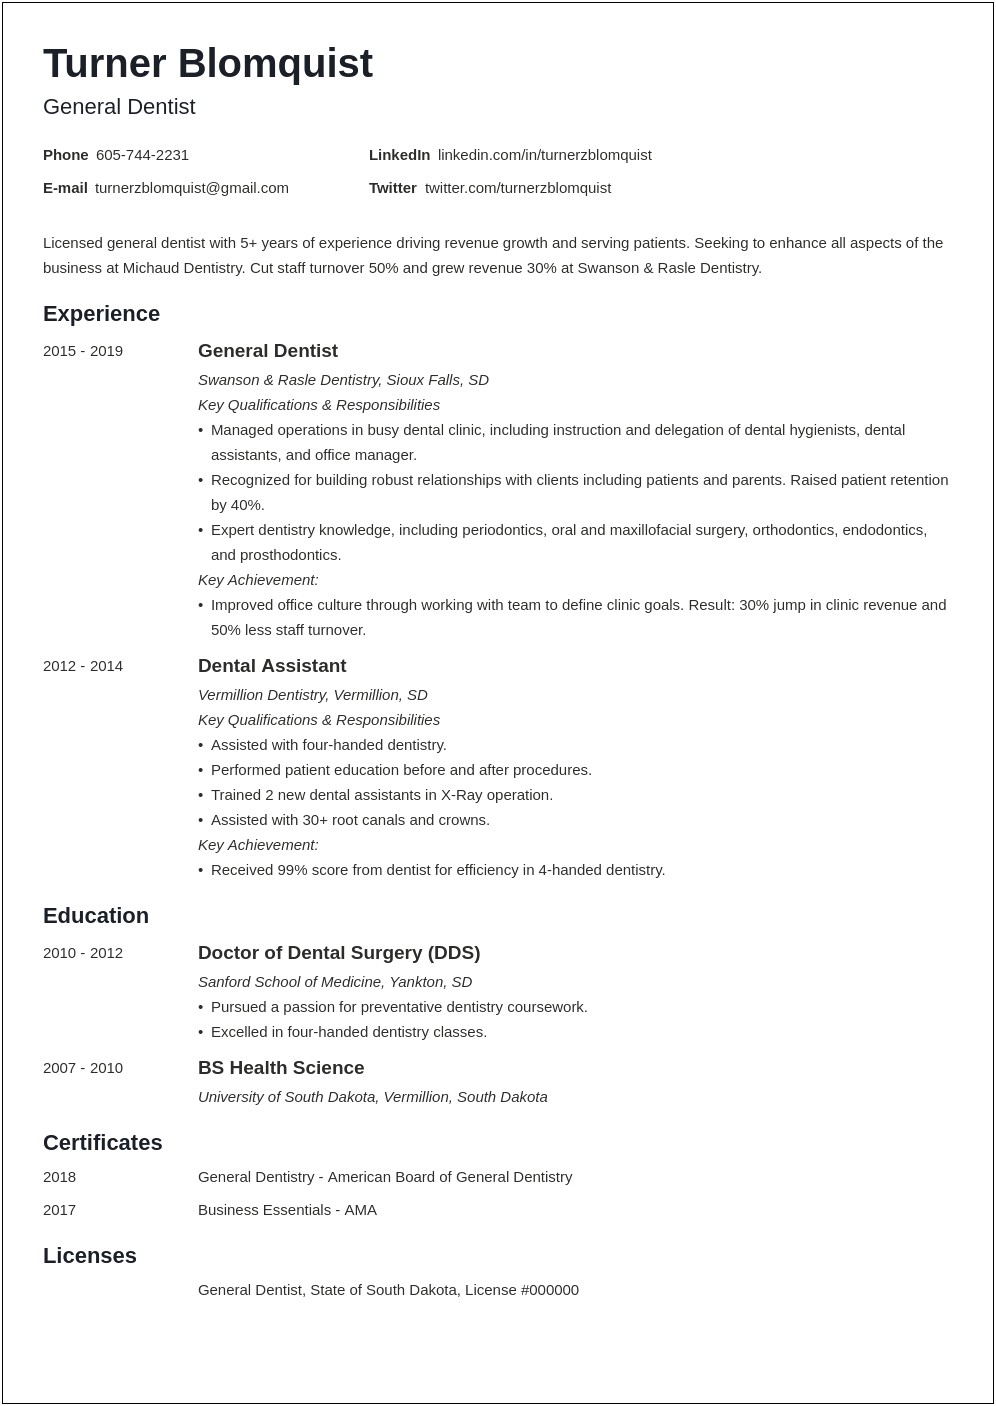 Dental Hygienist Skills And Abilities For Resume